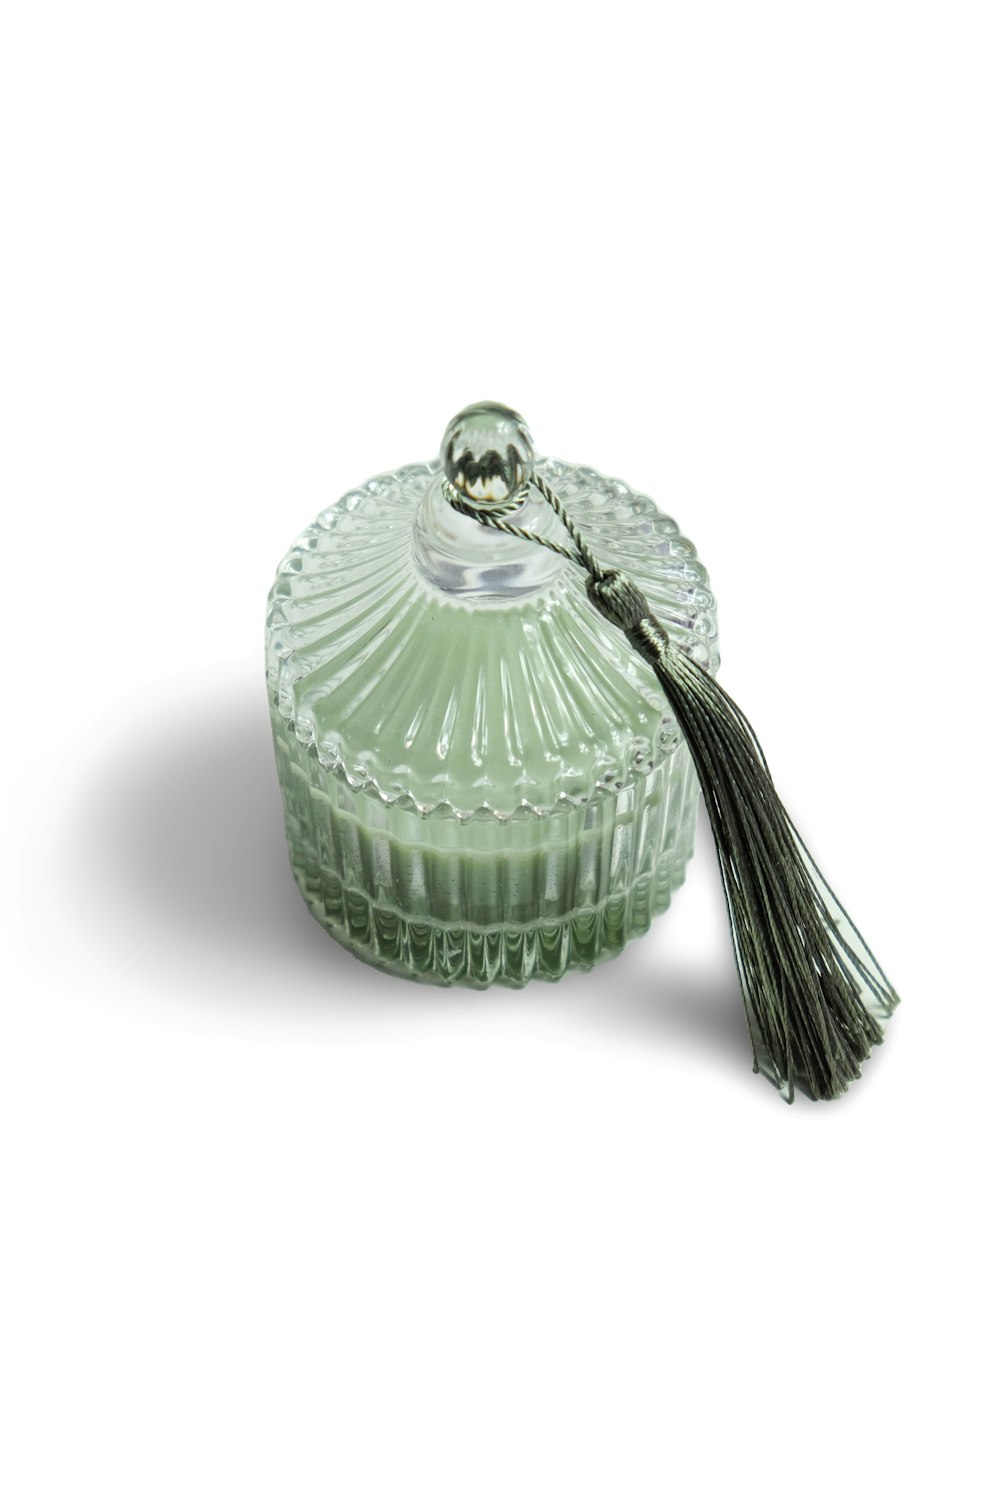 a glass dish with a tassel on top of it